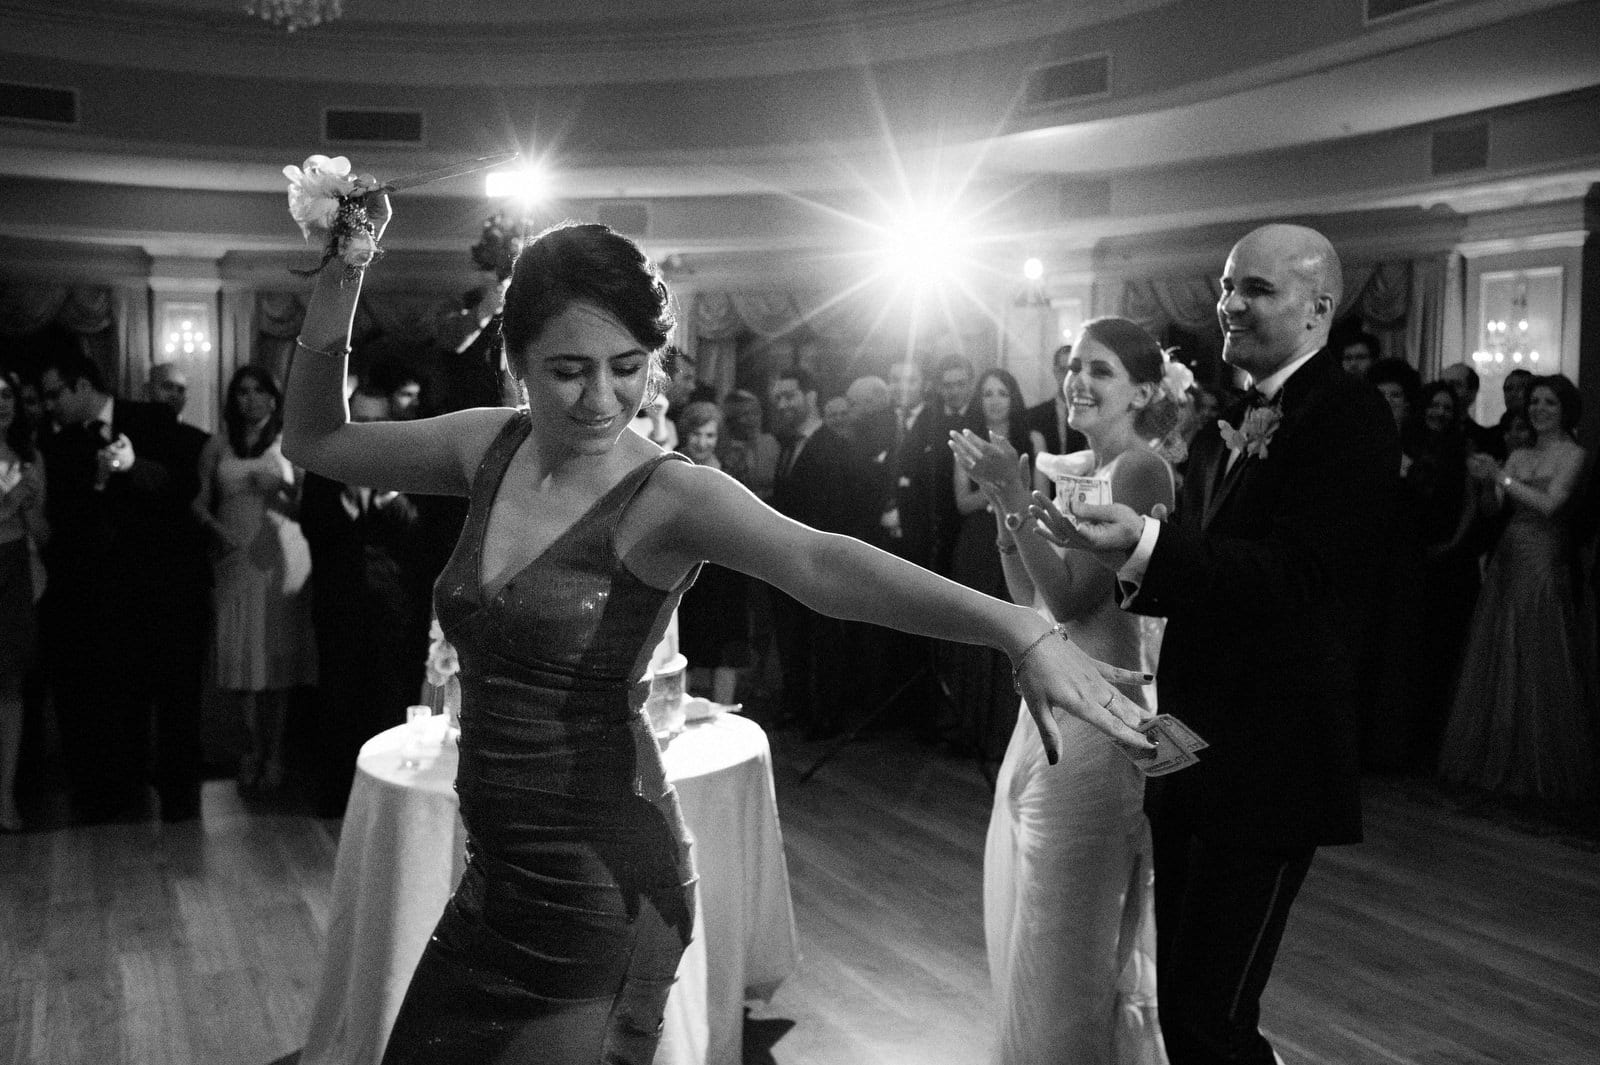 A woman dances with a knife and a ten dollar bill at a Persian wedding at Oheka Castle. The bride and groom smile and applaud behind her.